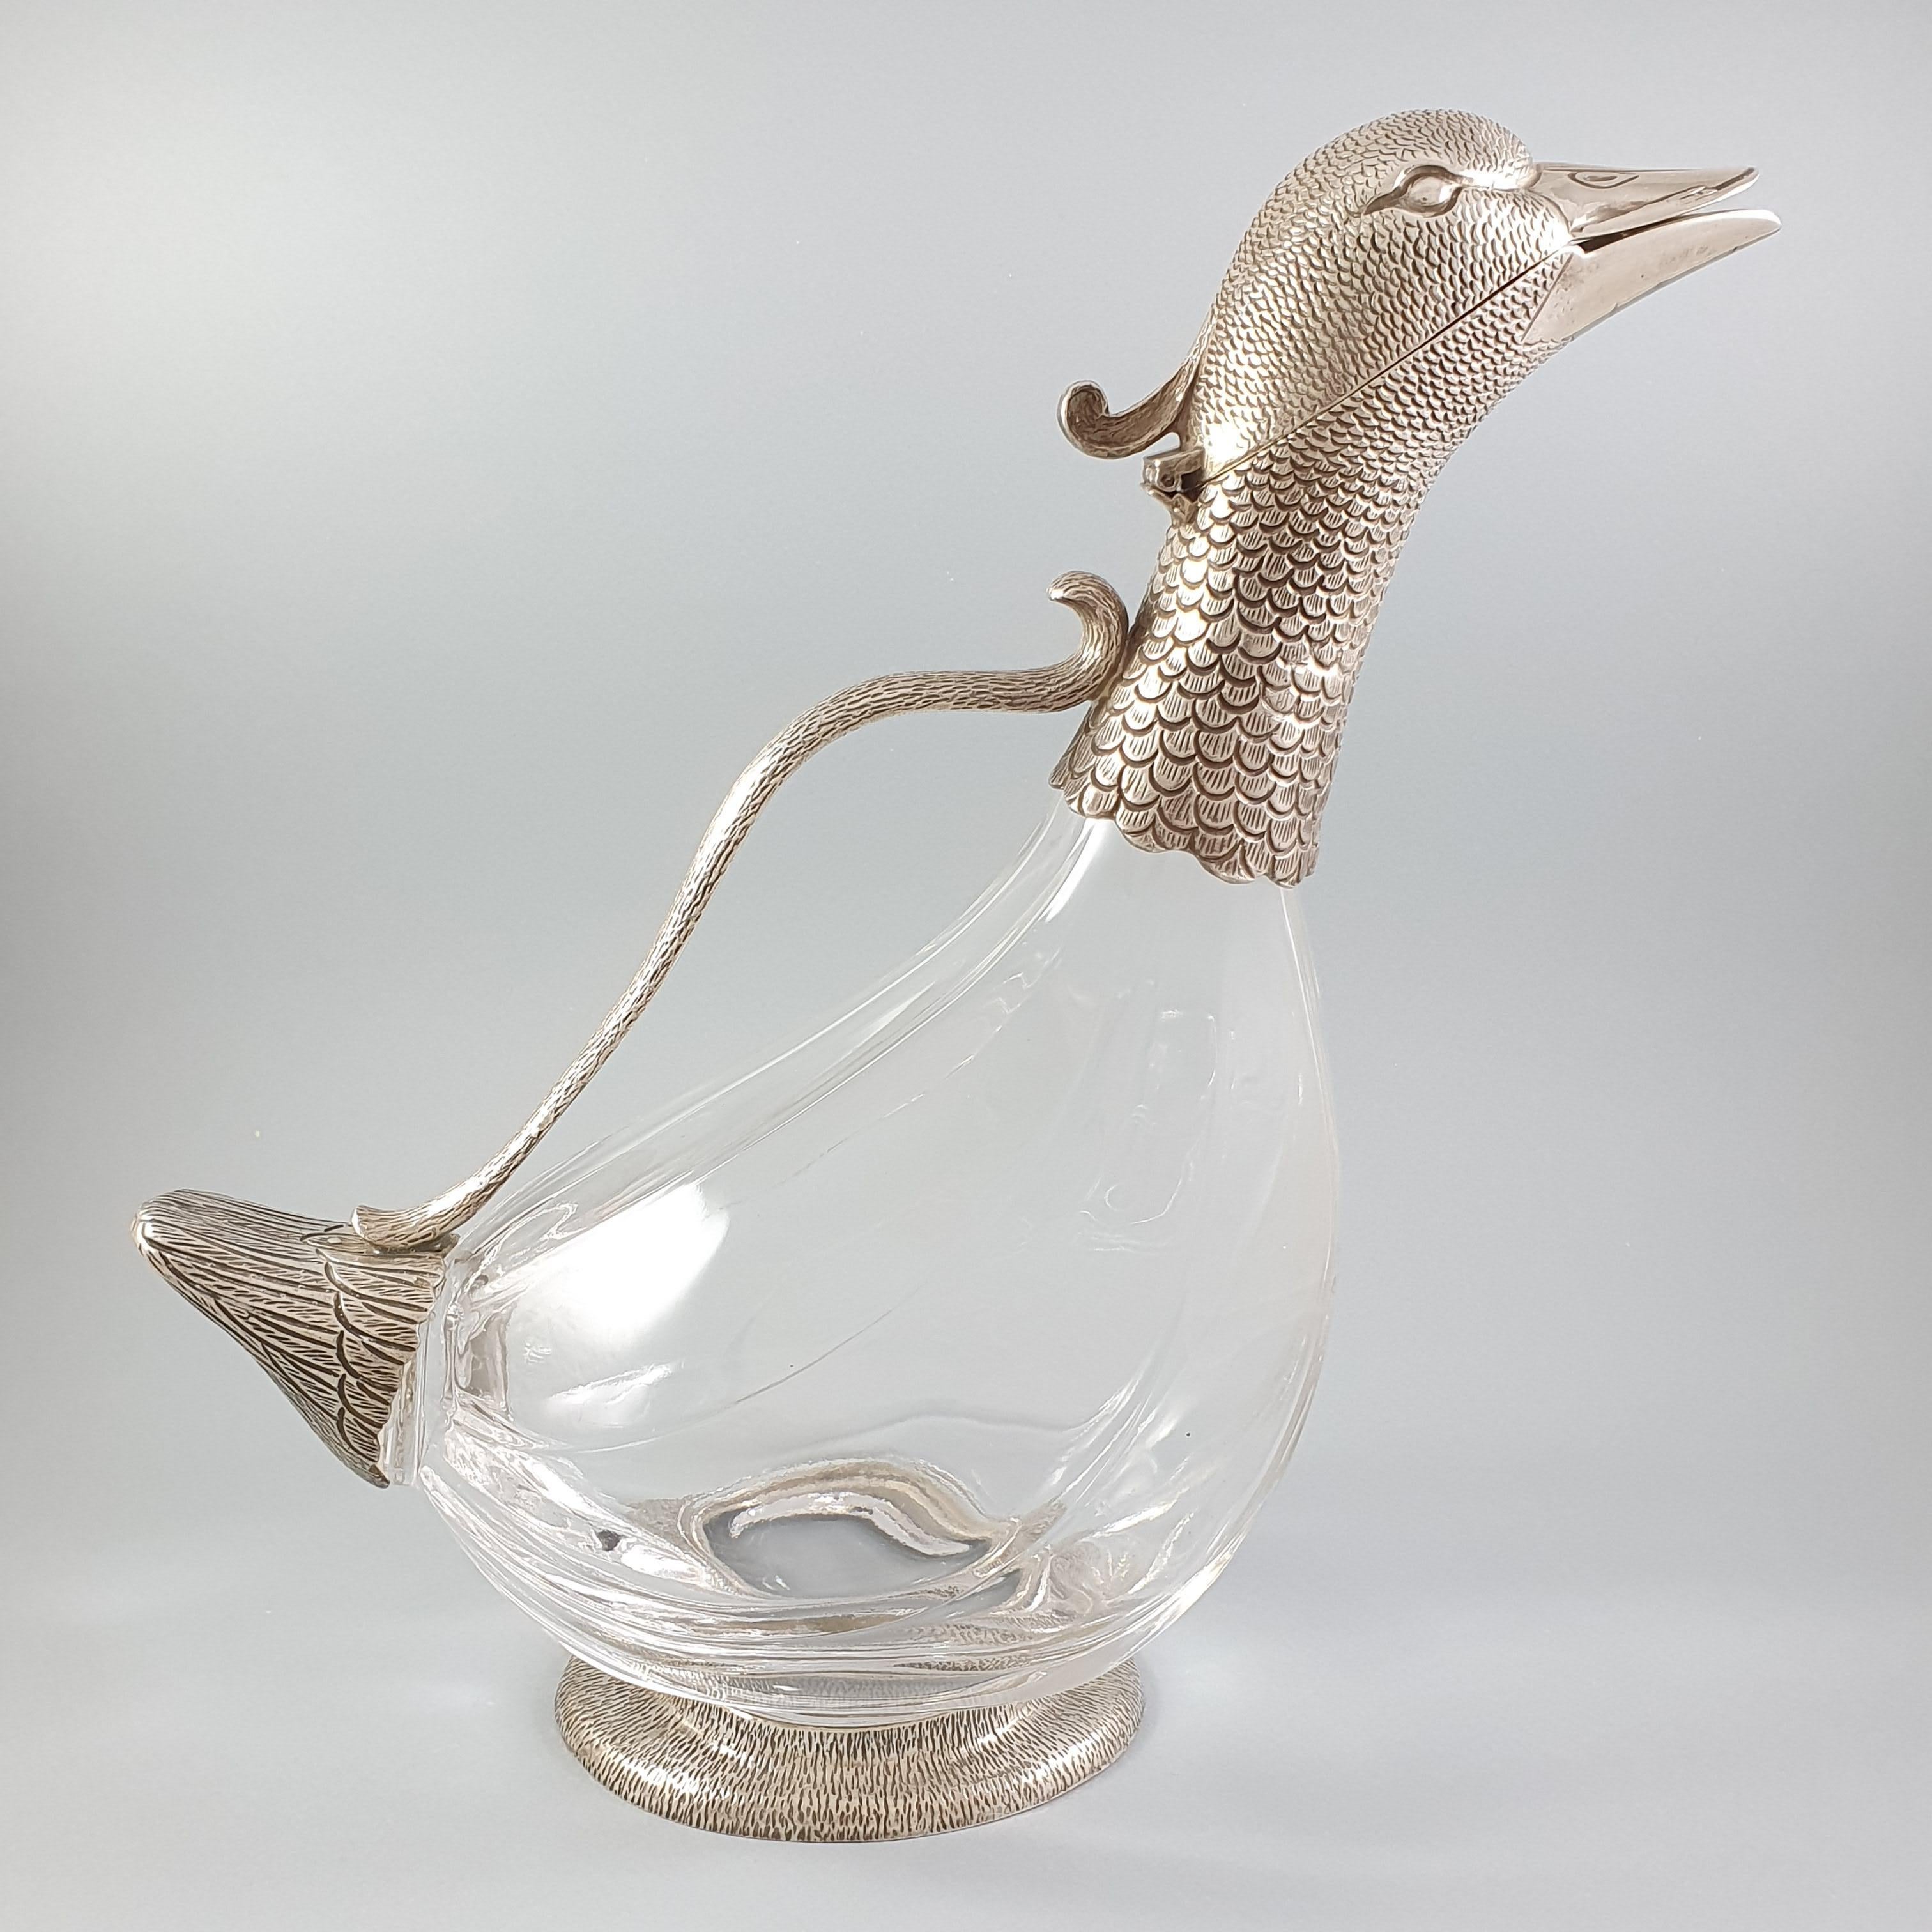 Ewer in crystal and Sterling Silver in the shape of a duck

Italian work of the 20th century 
Hallmarkeded 925 silver 

Size: Height: 26 cm

Perfect condition.